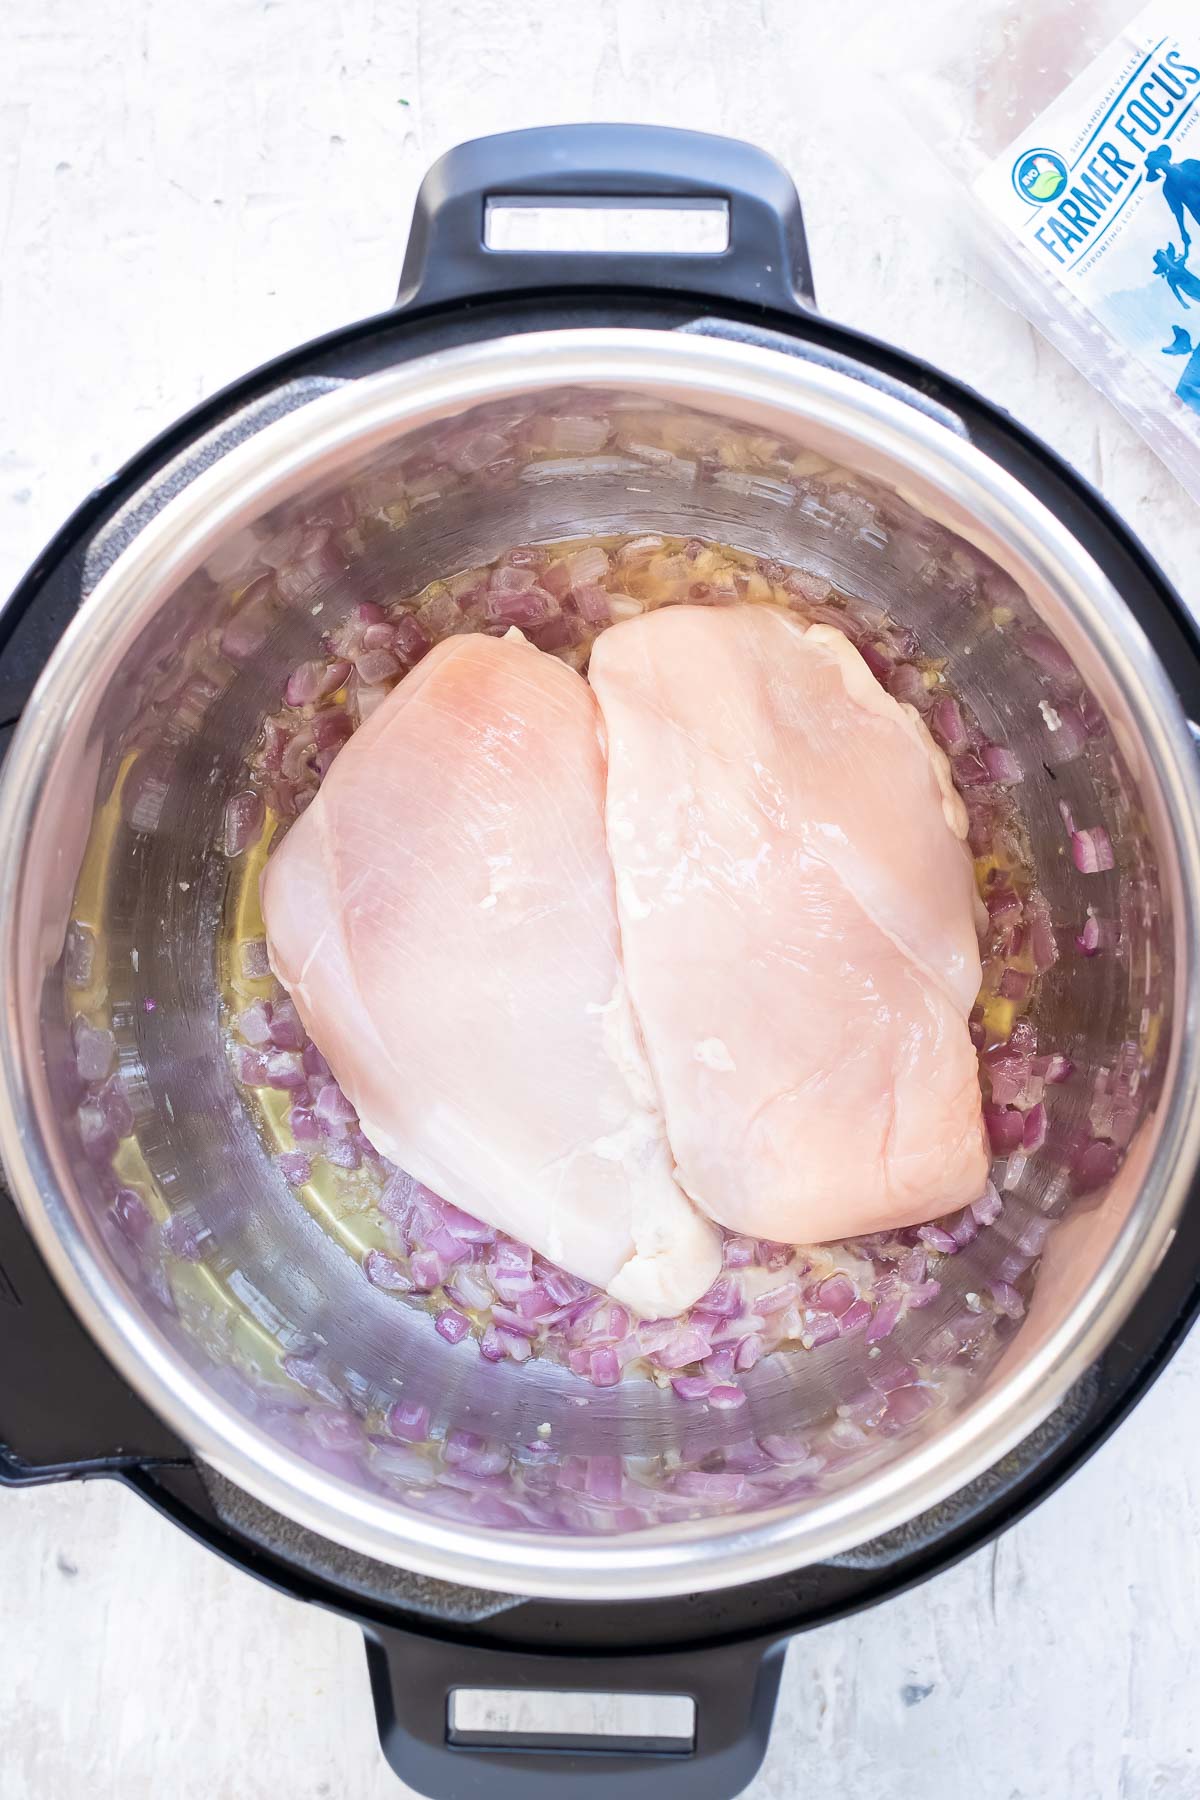 Chicken is placed in the Instant Pot.